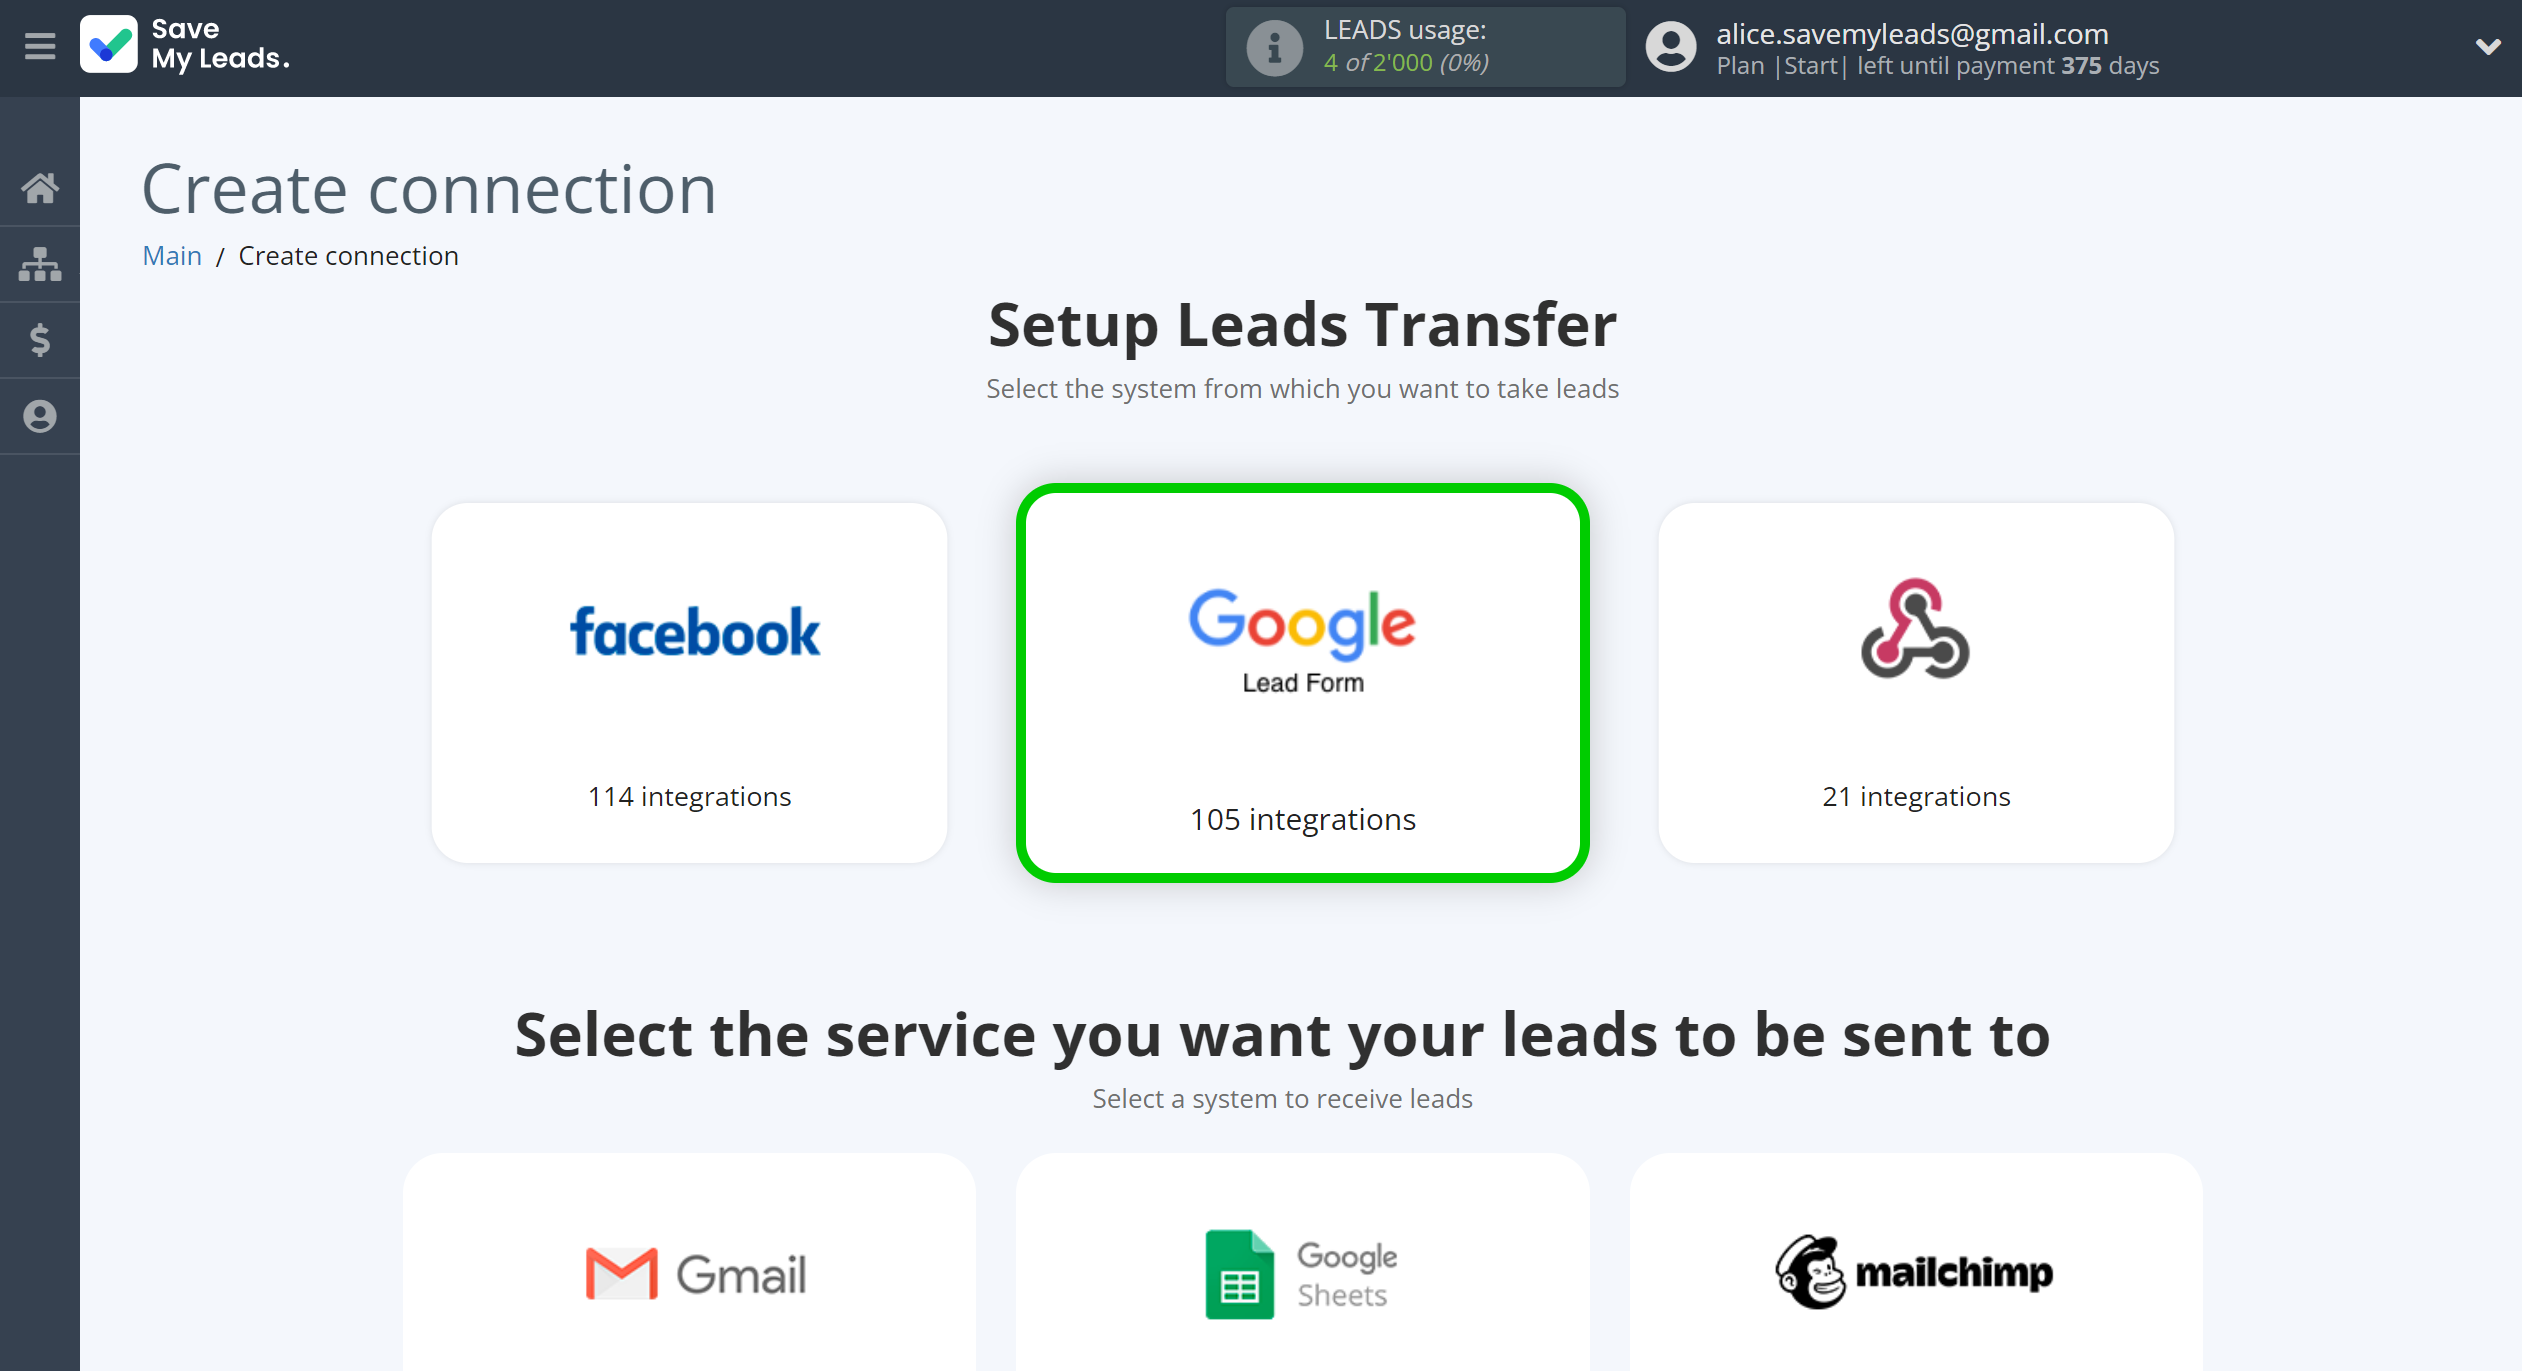 How to Connect Google Lead Form with SMSGlobal | Data Source system selection